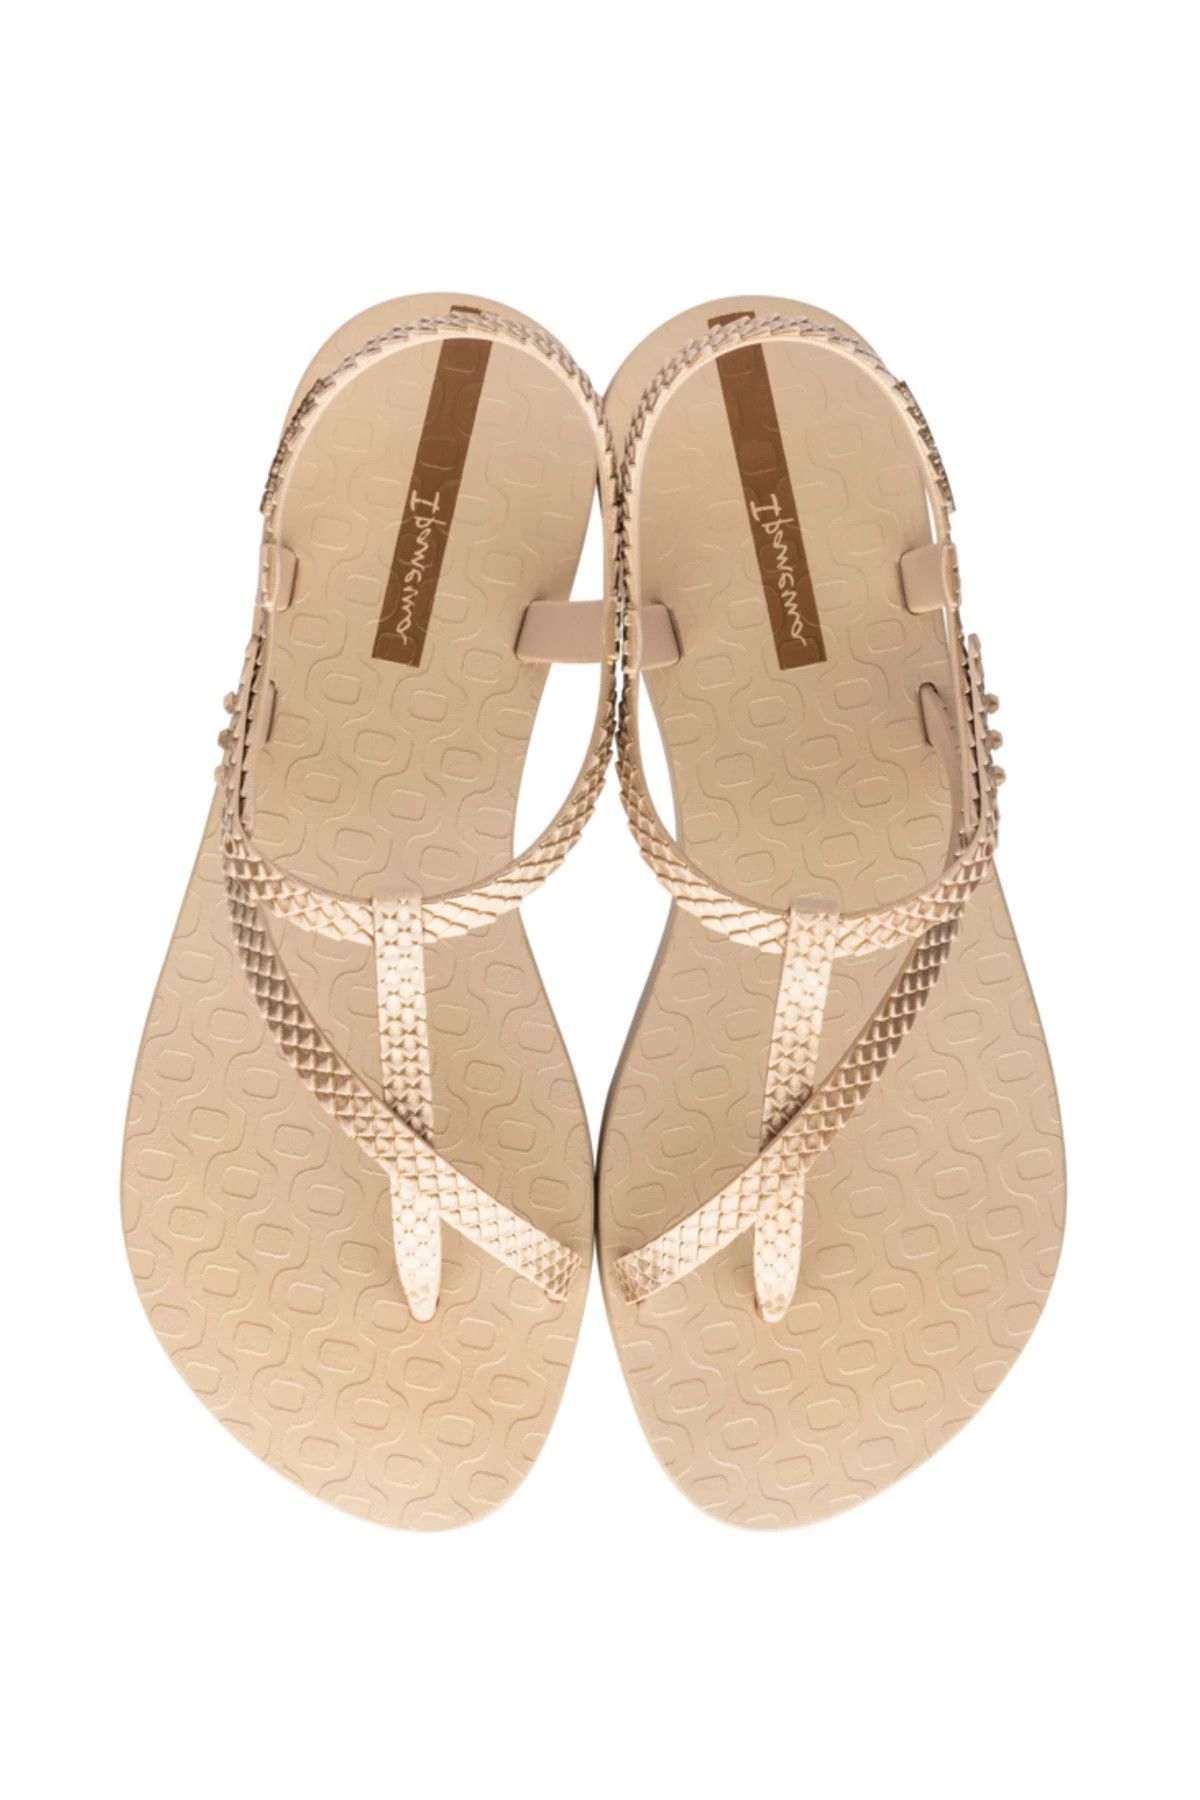 Aphrodite Sandals | Everything But Water